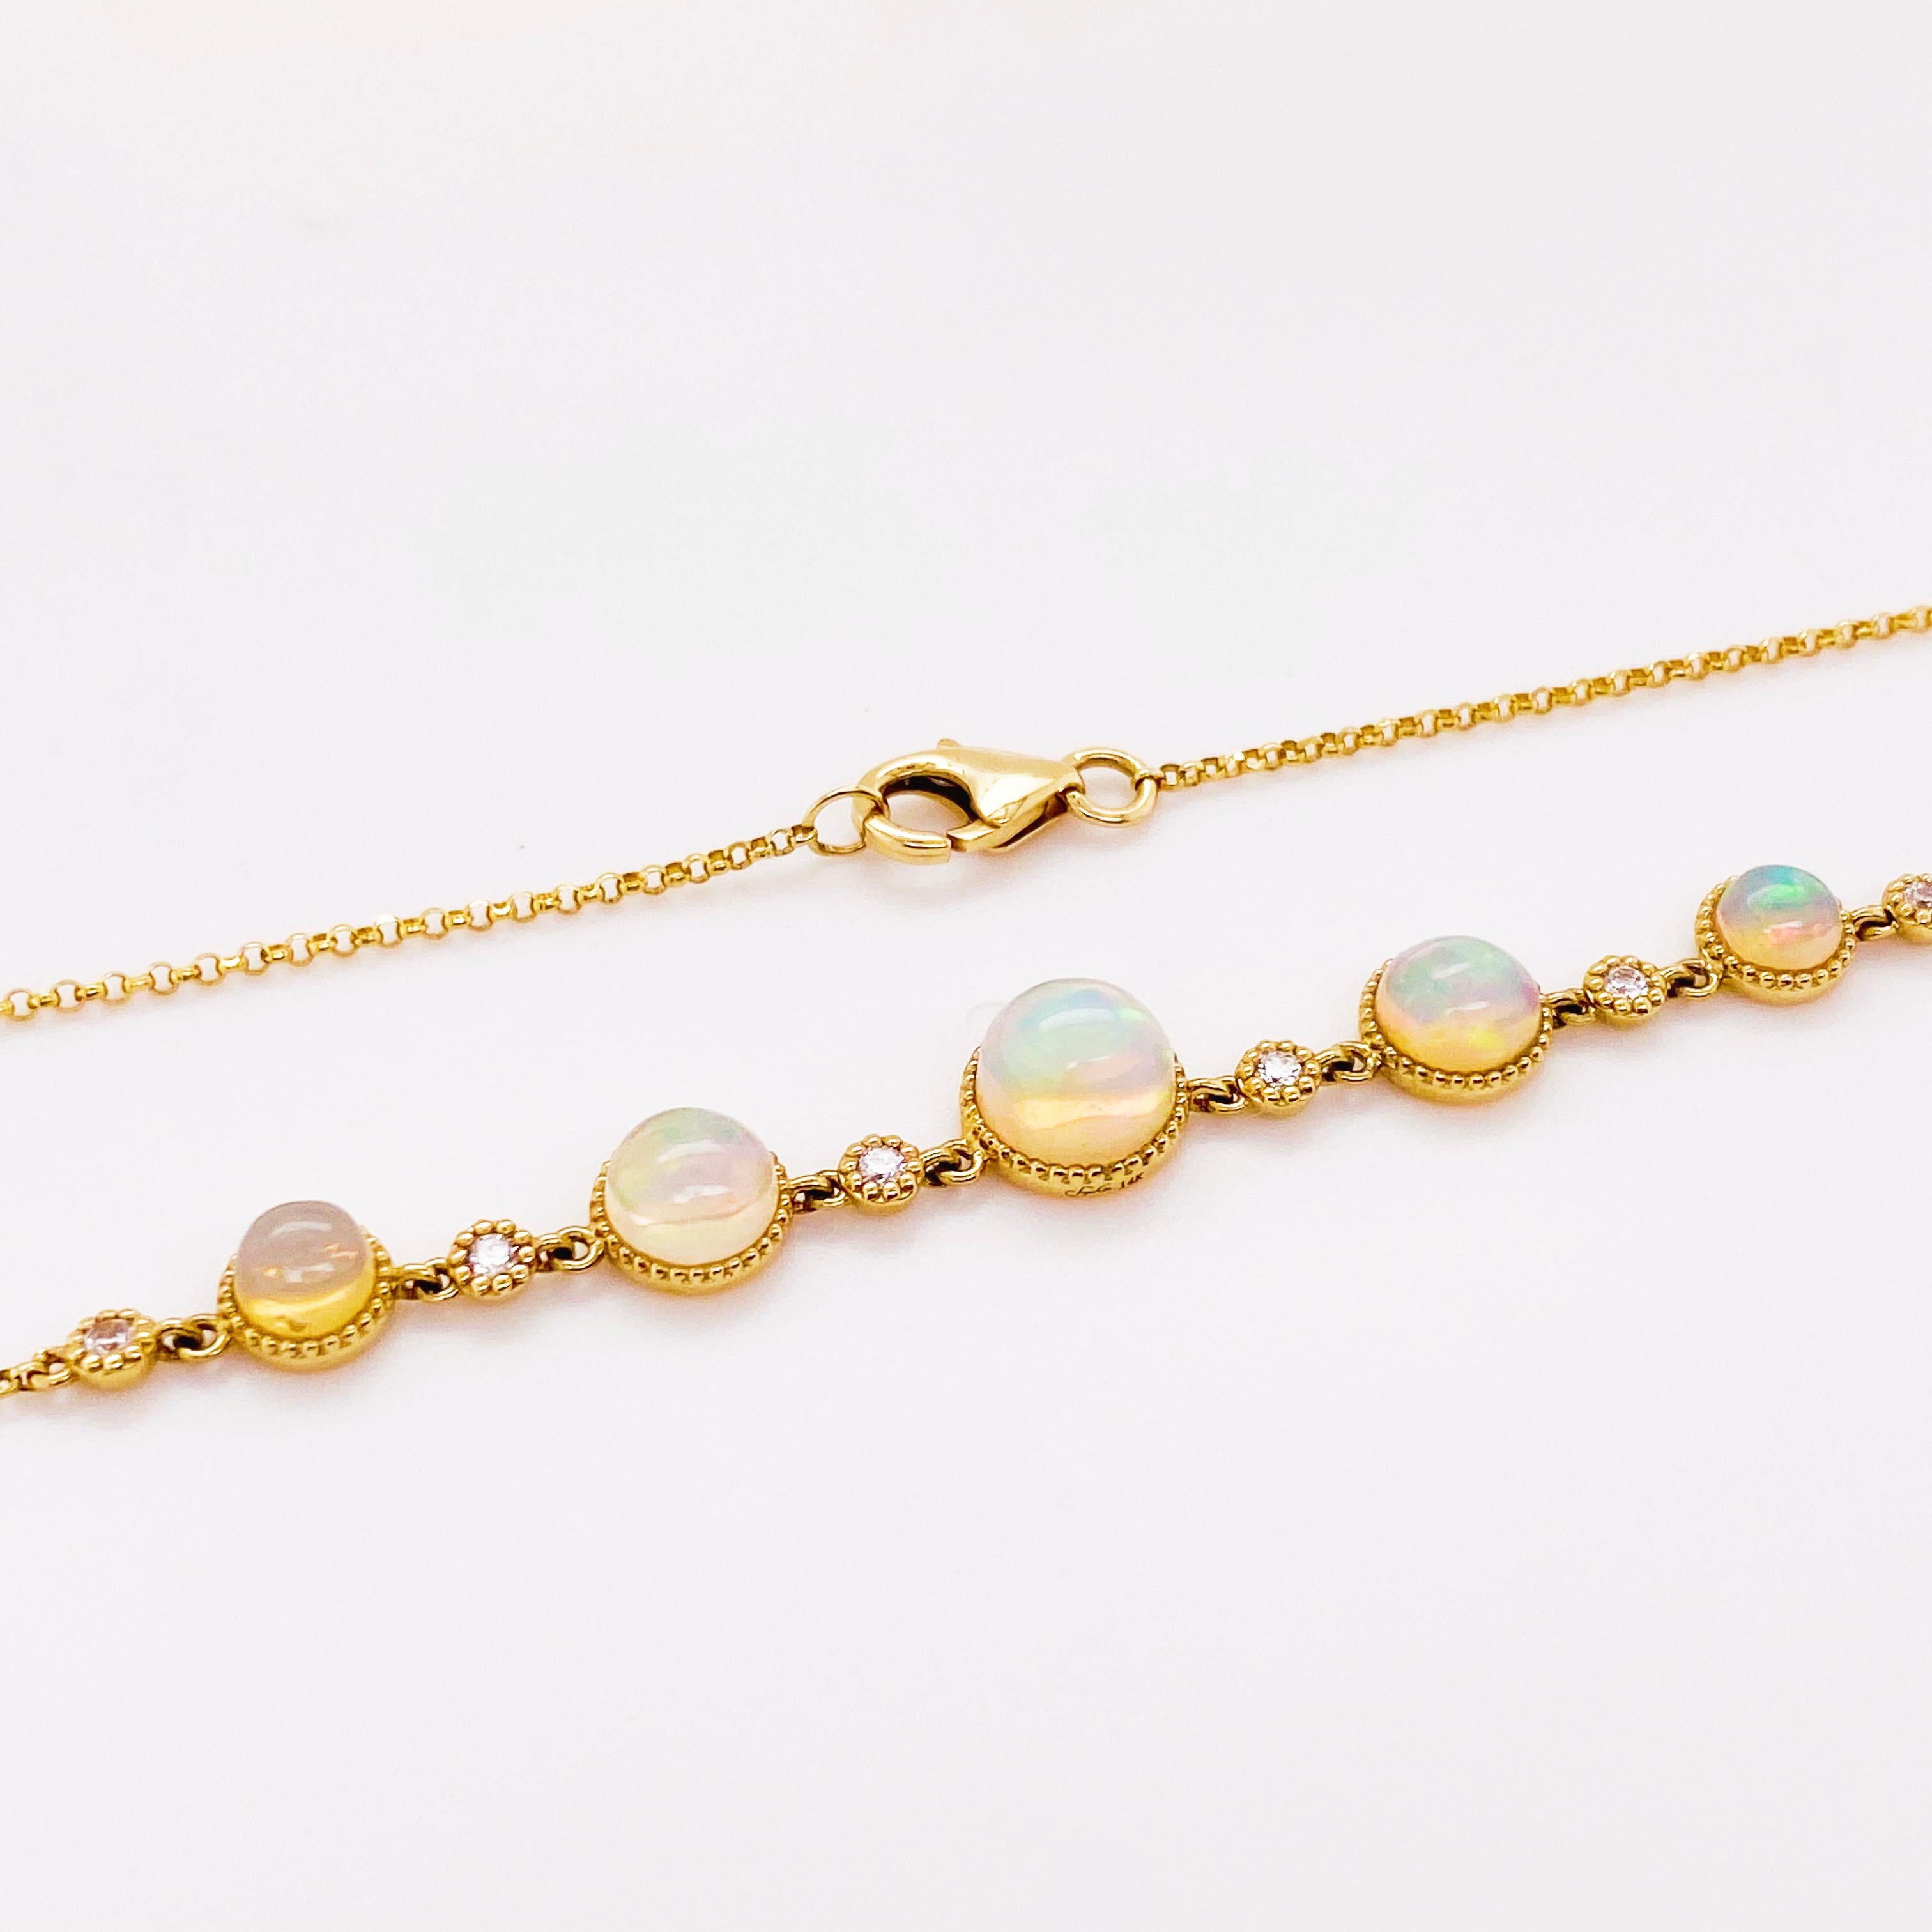 Arts and Crafts Opal and Diamond Necklace Set in 14k Gold Bezel w Beaded Chain, 1.00 Carat Opals